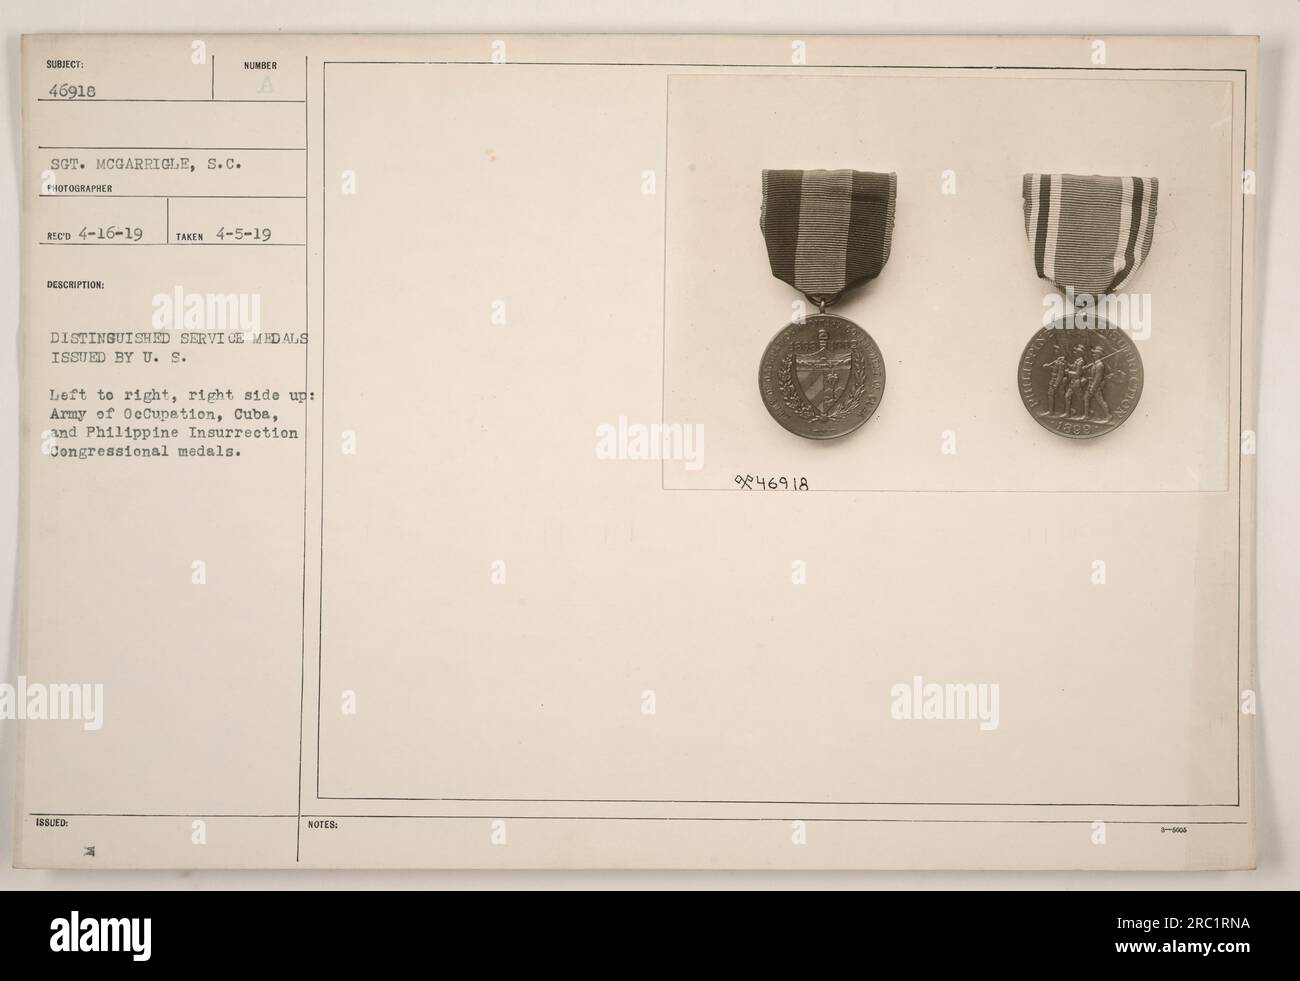 Distinguished Service Medals issued by the U.S. are displayed in the photograph. From left to right, right side up, the medals are: Army of Occupation, Cuba, and Philippine Insurrection congressional medals. The subject of the photograph is Sergeant McGarrigle, who was the recipient of the medals. The photo was taken on April 5, 1919. There are a total of 18 medals visible in the image. Stock Photo